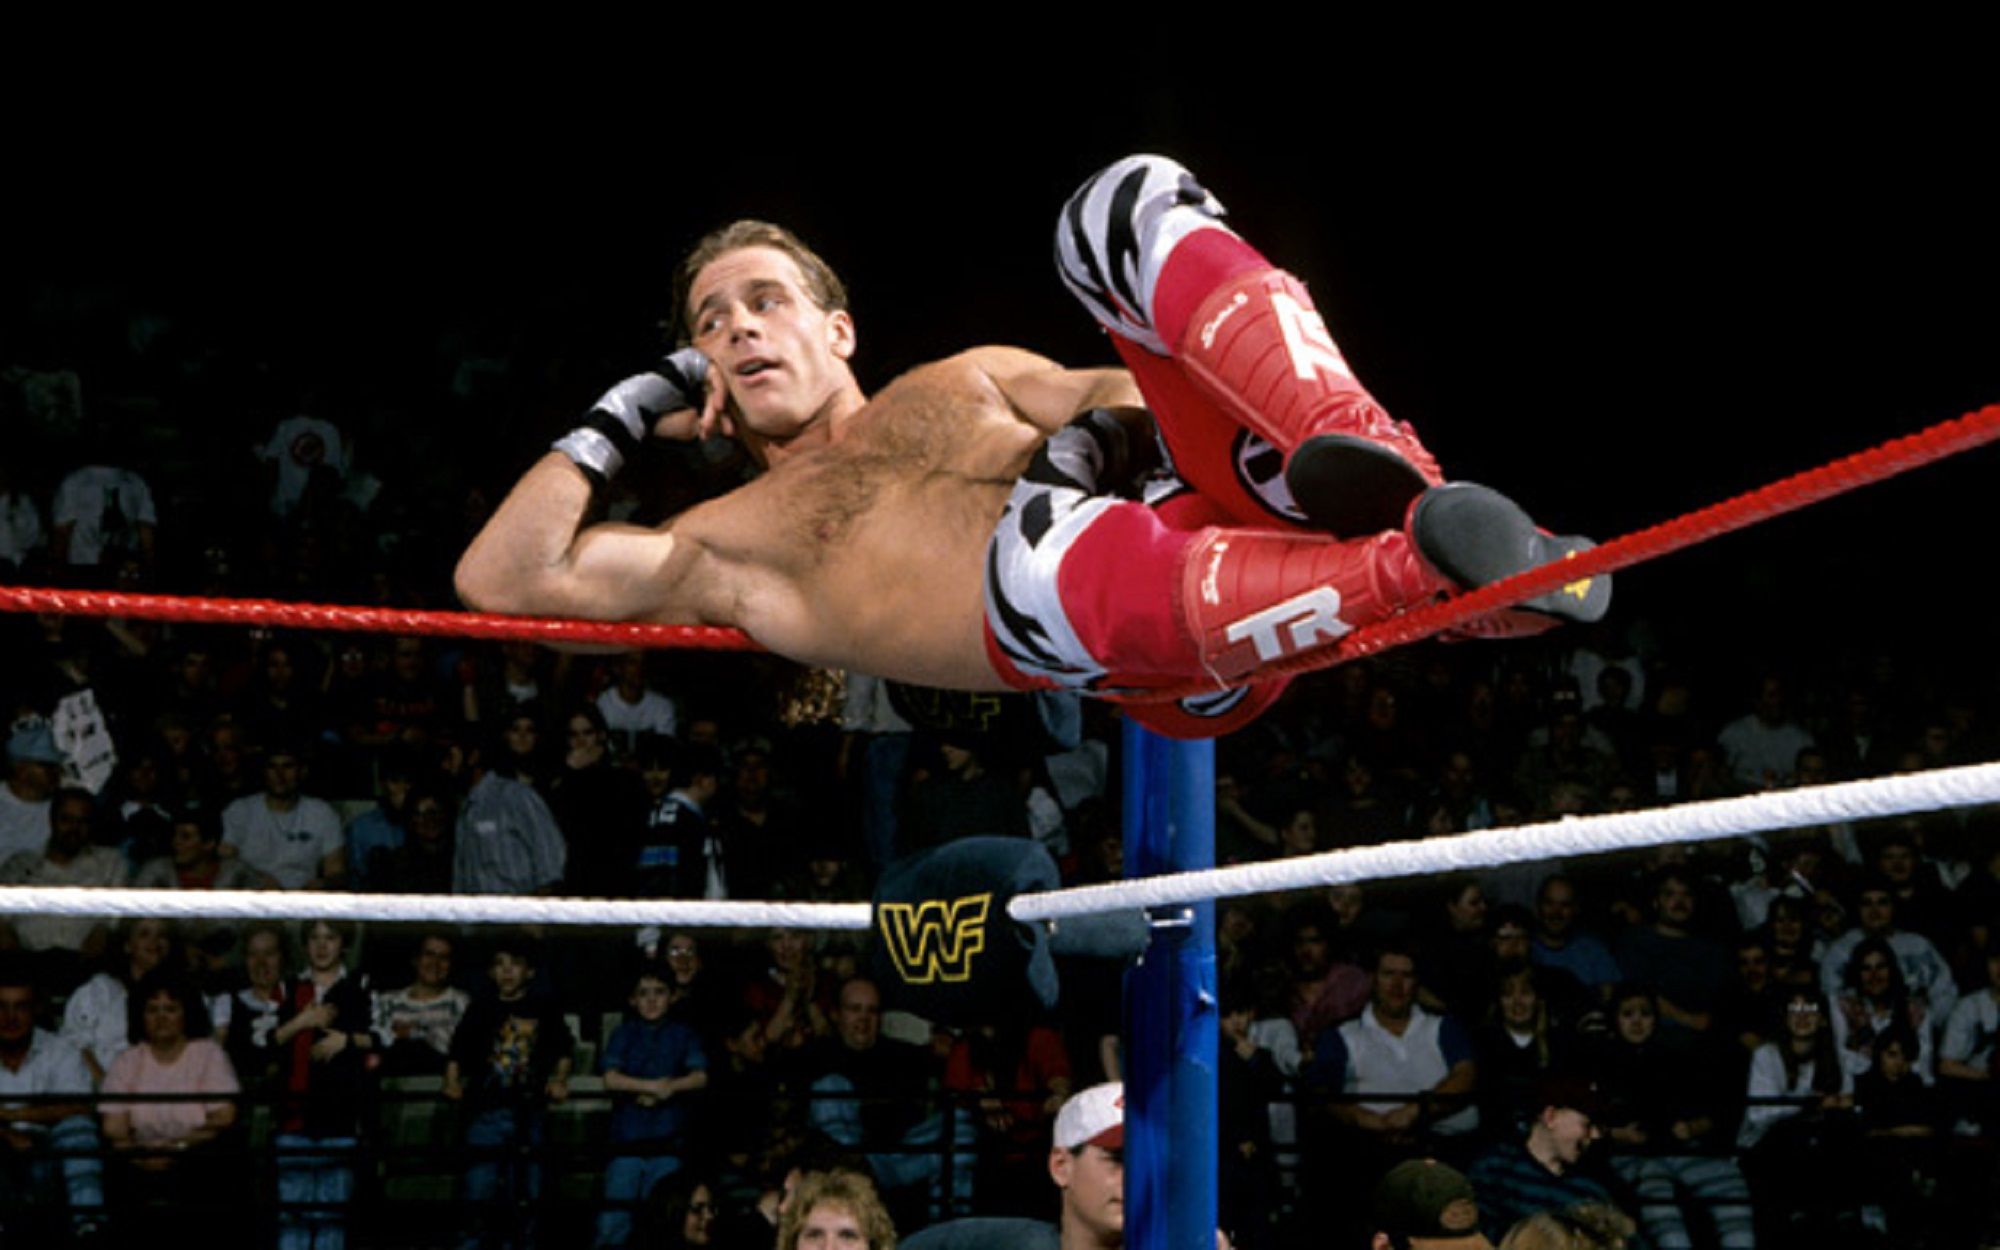 Download Legendary WWE Star Shawn Michaels on DVD Cover Wallpaper |  Wallpapers.com